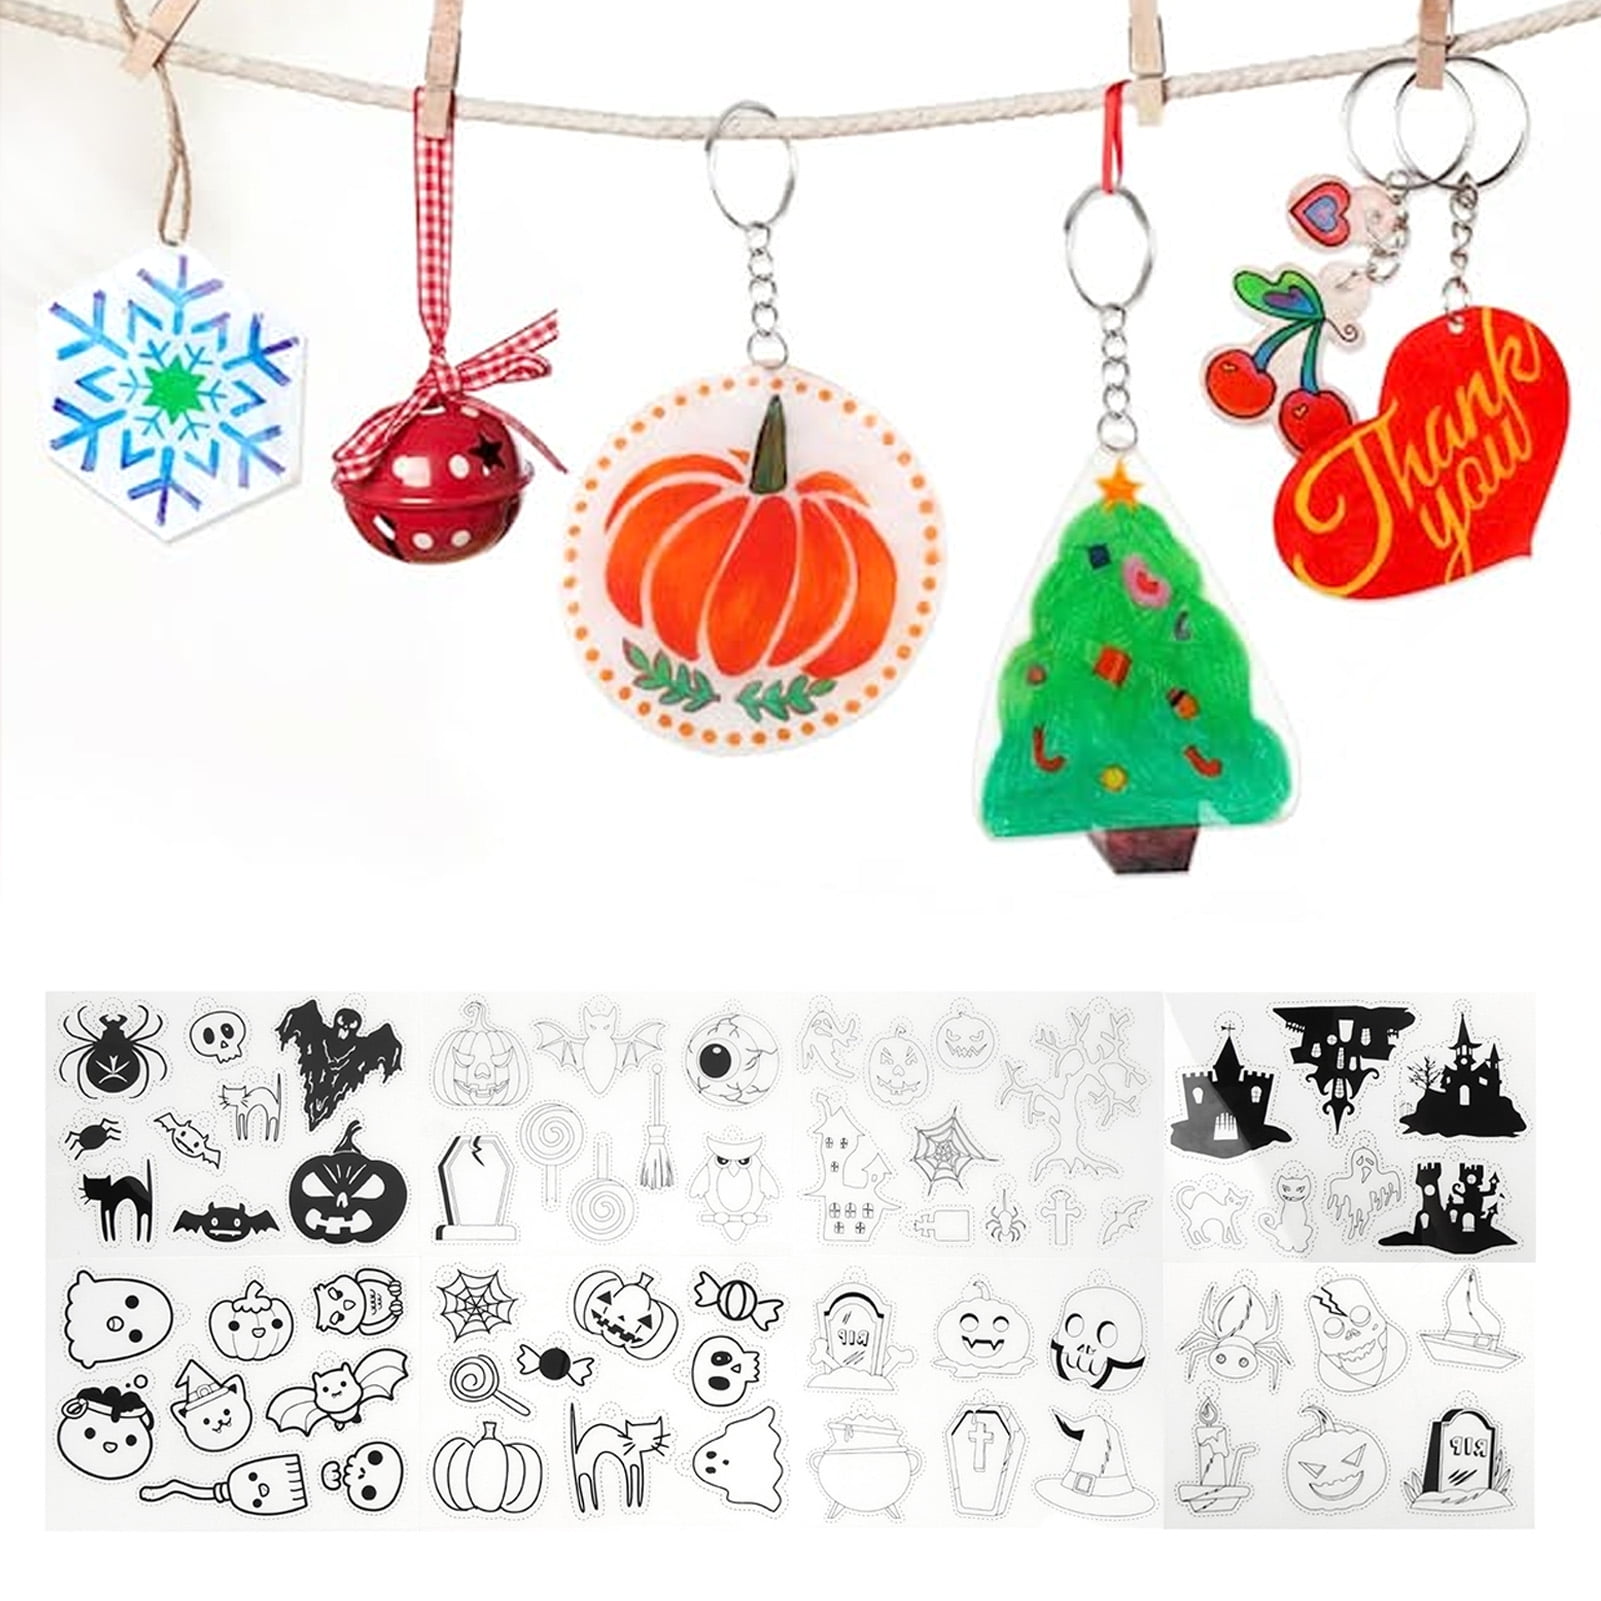 Shrinky Dink Keychain Kit Creative Craft DIY Classroom Homemade Shrinky  Dink Sheets For Christmas Mother's Day Easy To Use - AliExpress